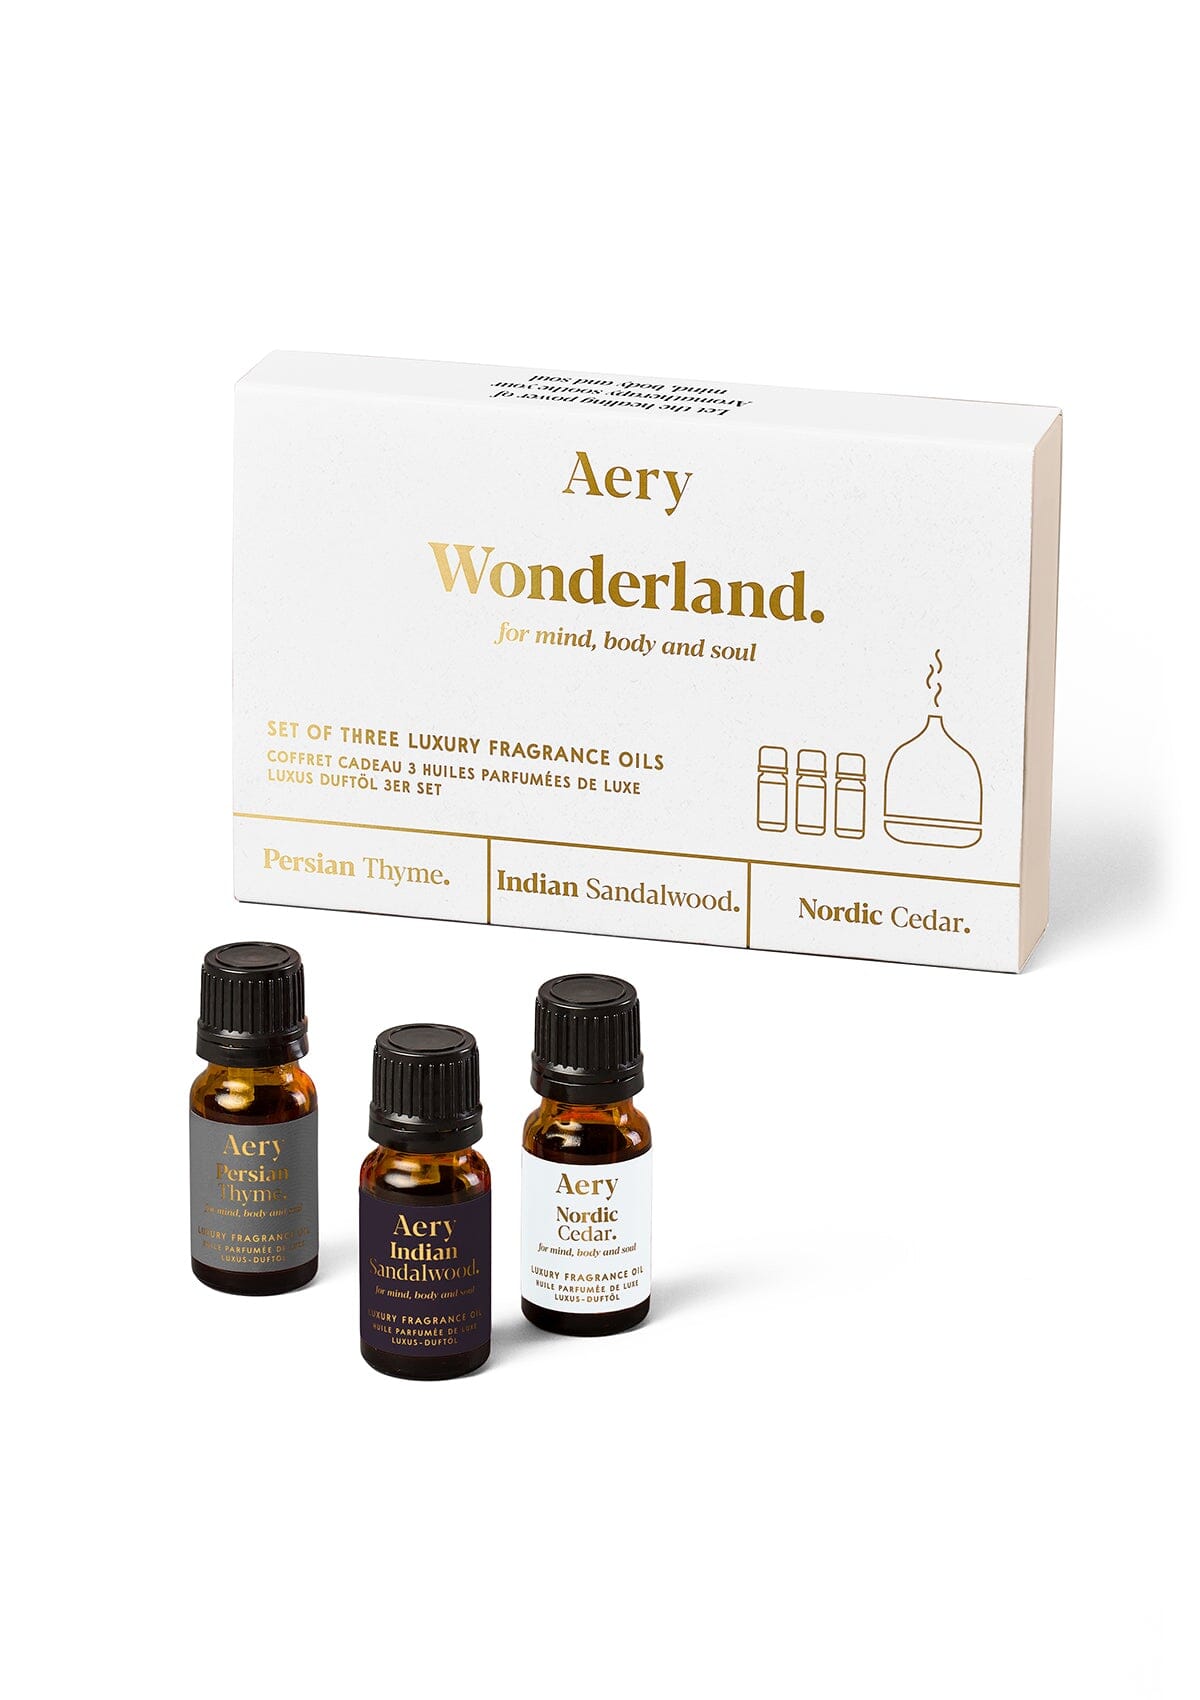 White Wonderland fragrance oil set of three displayed next to product packaging by Aery on white background 